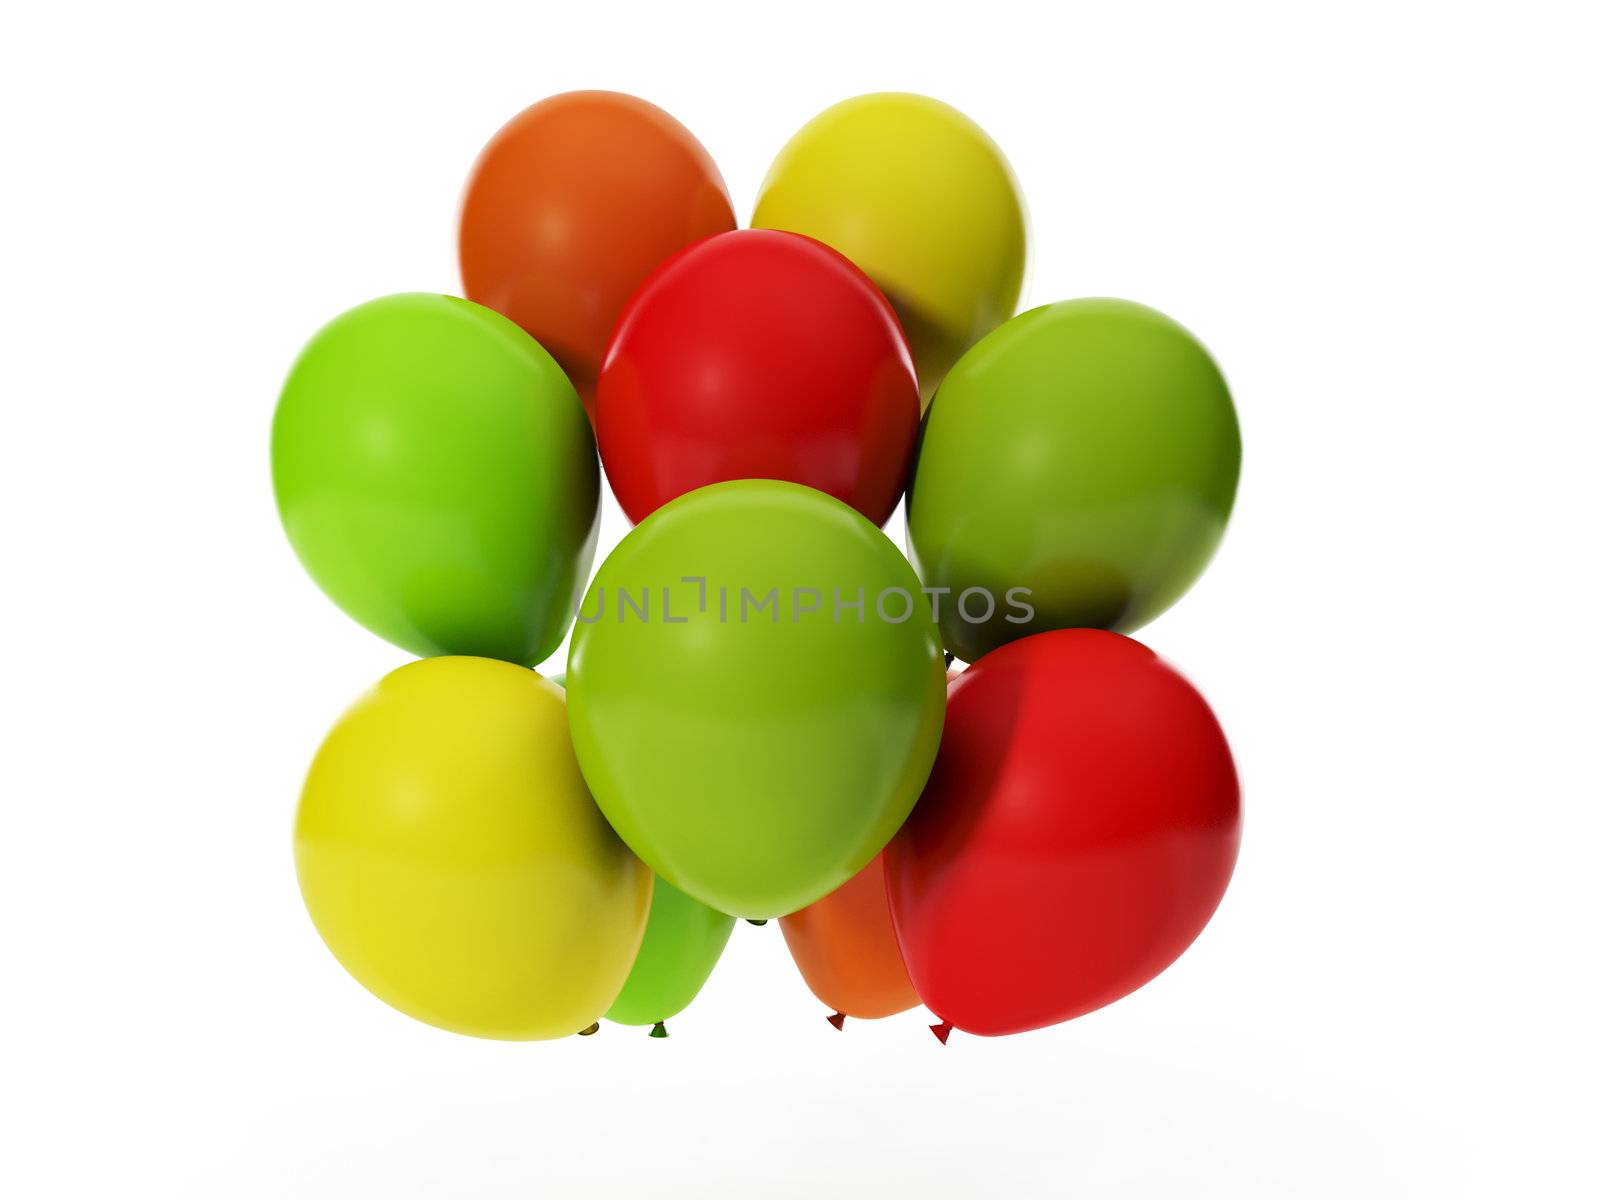 3d illustration: Events and entertainment, a group of colorful balloons